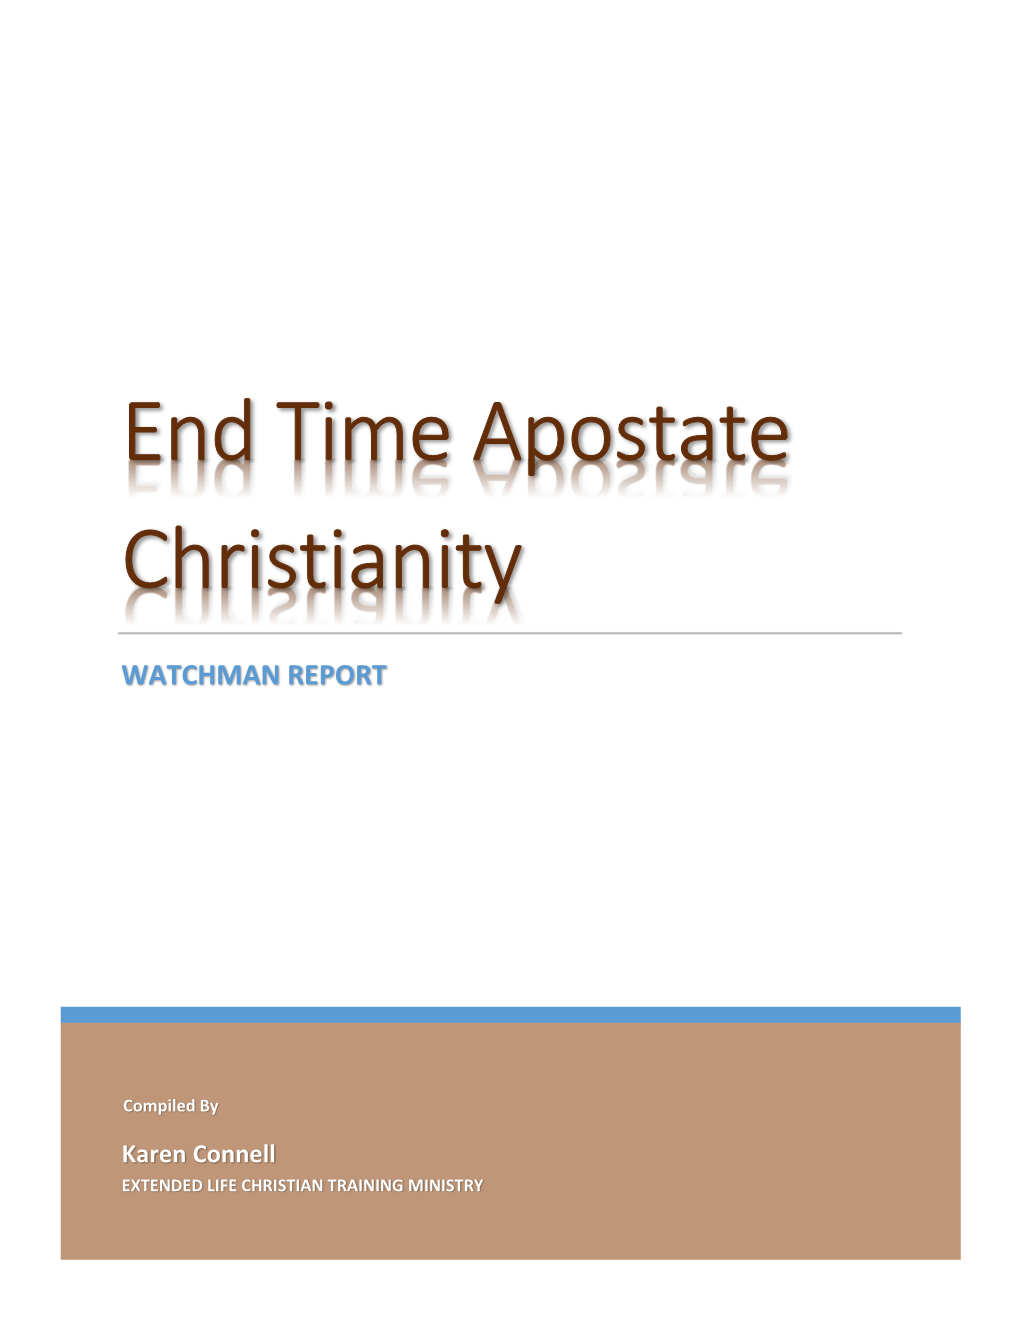 End Time Apostate Christianity